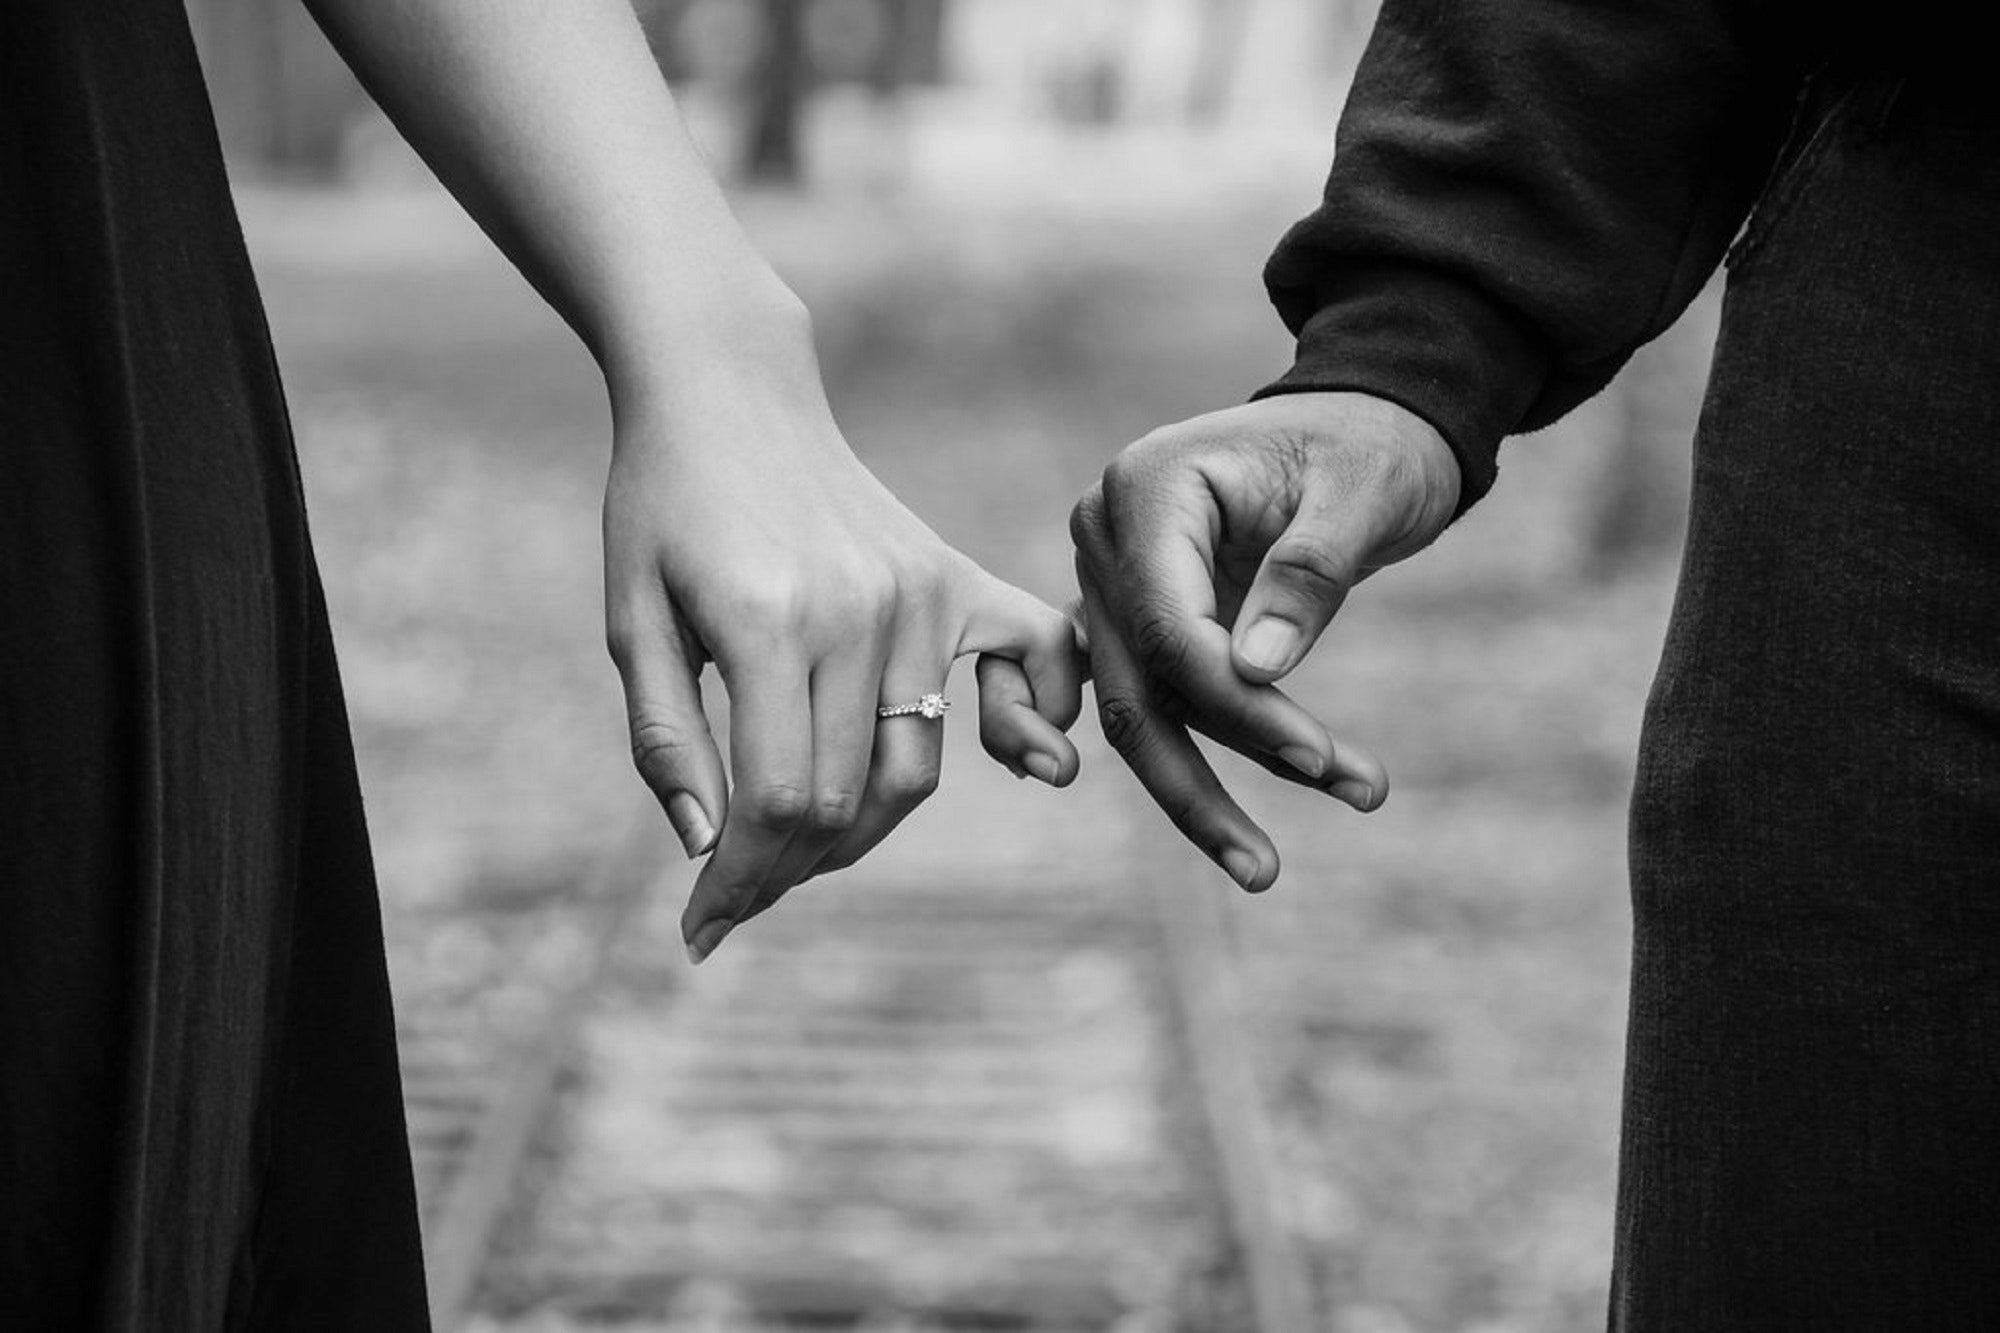 Close-up of a couple's hands gently touching fingertips in black and white.